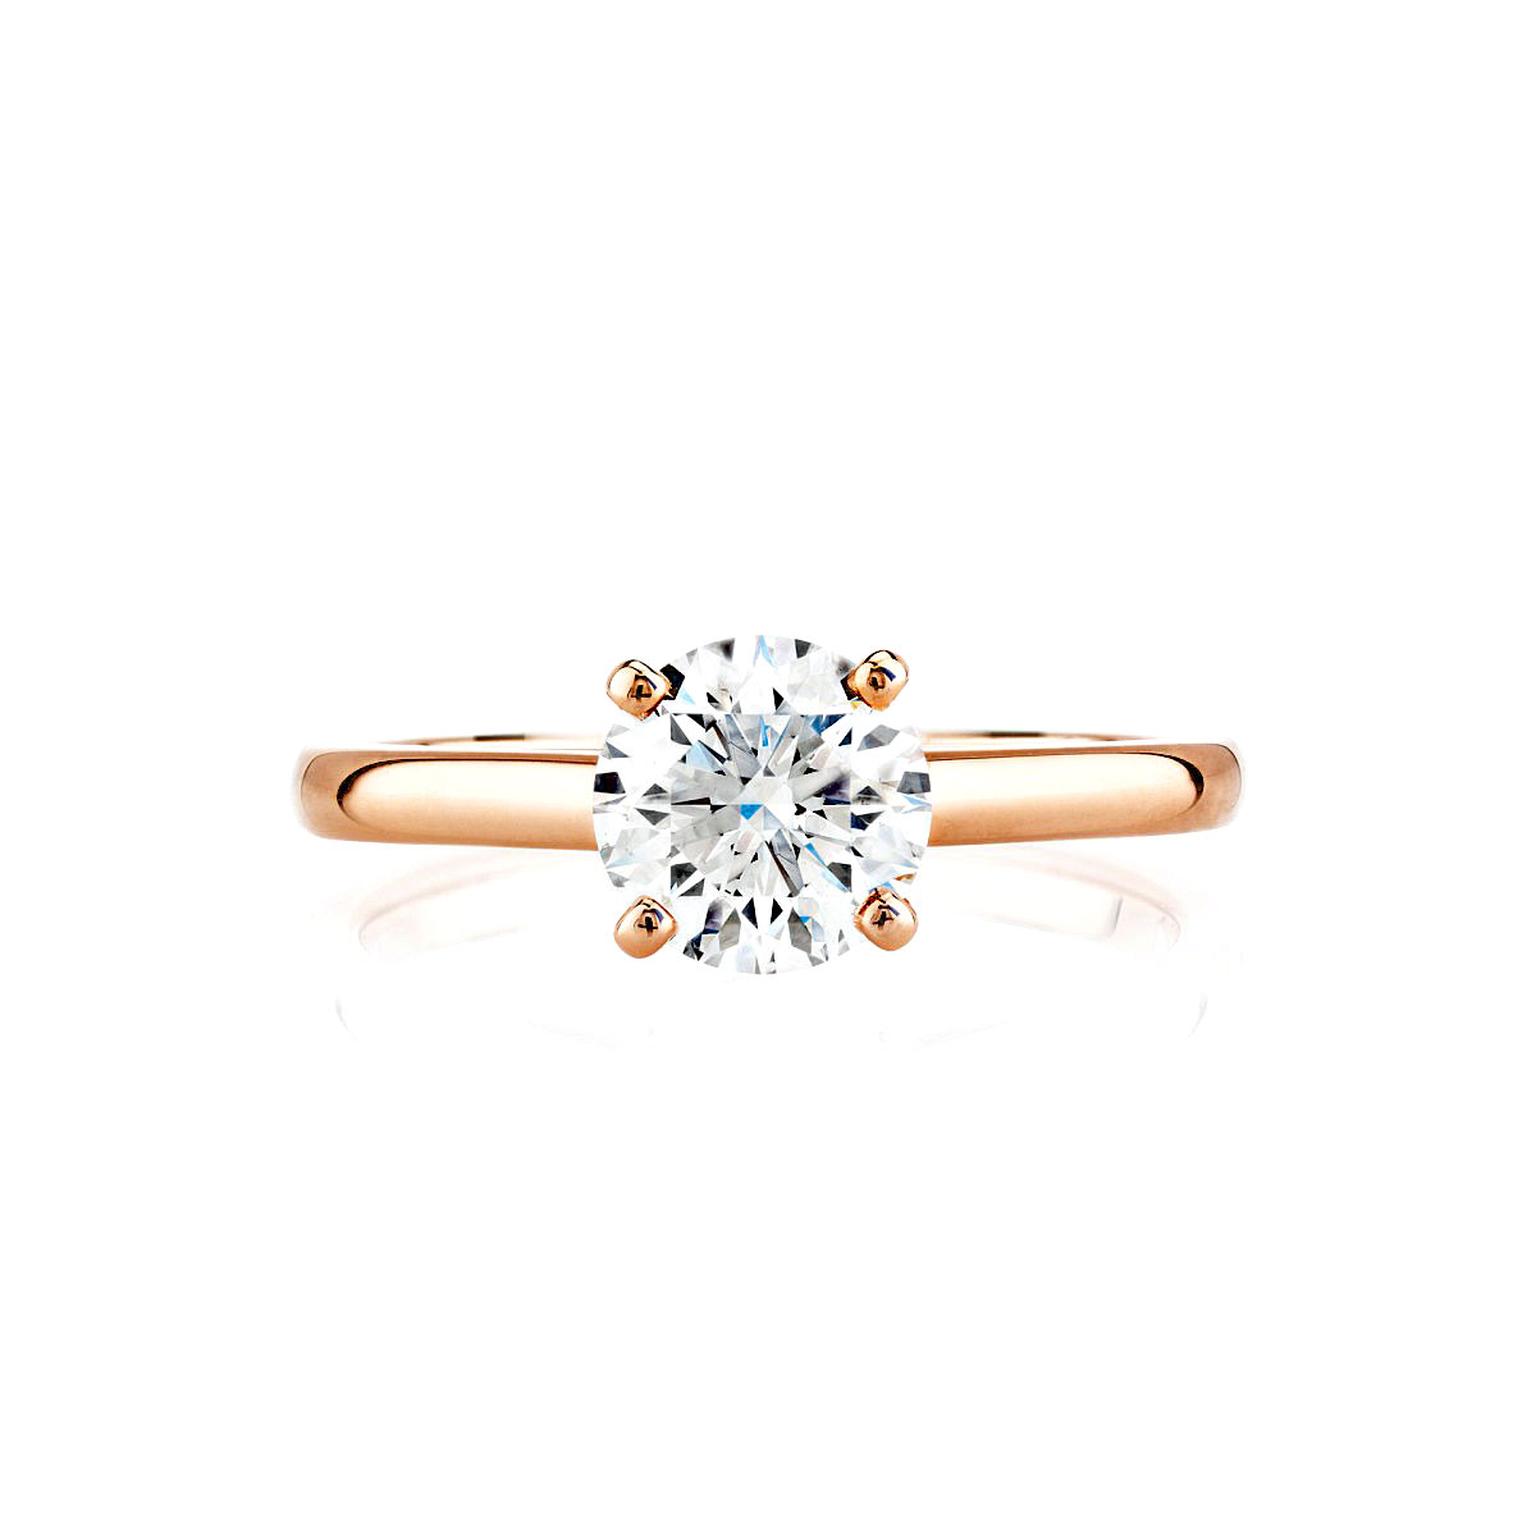 Claw-set Classic De Beers engagement ring